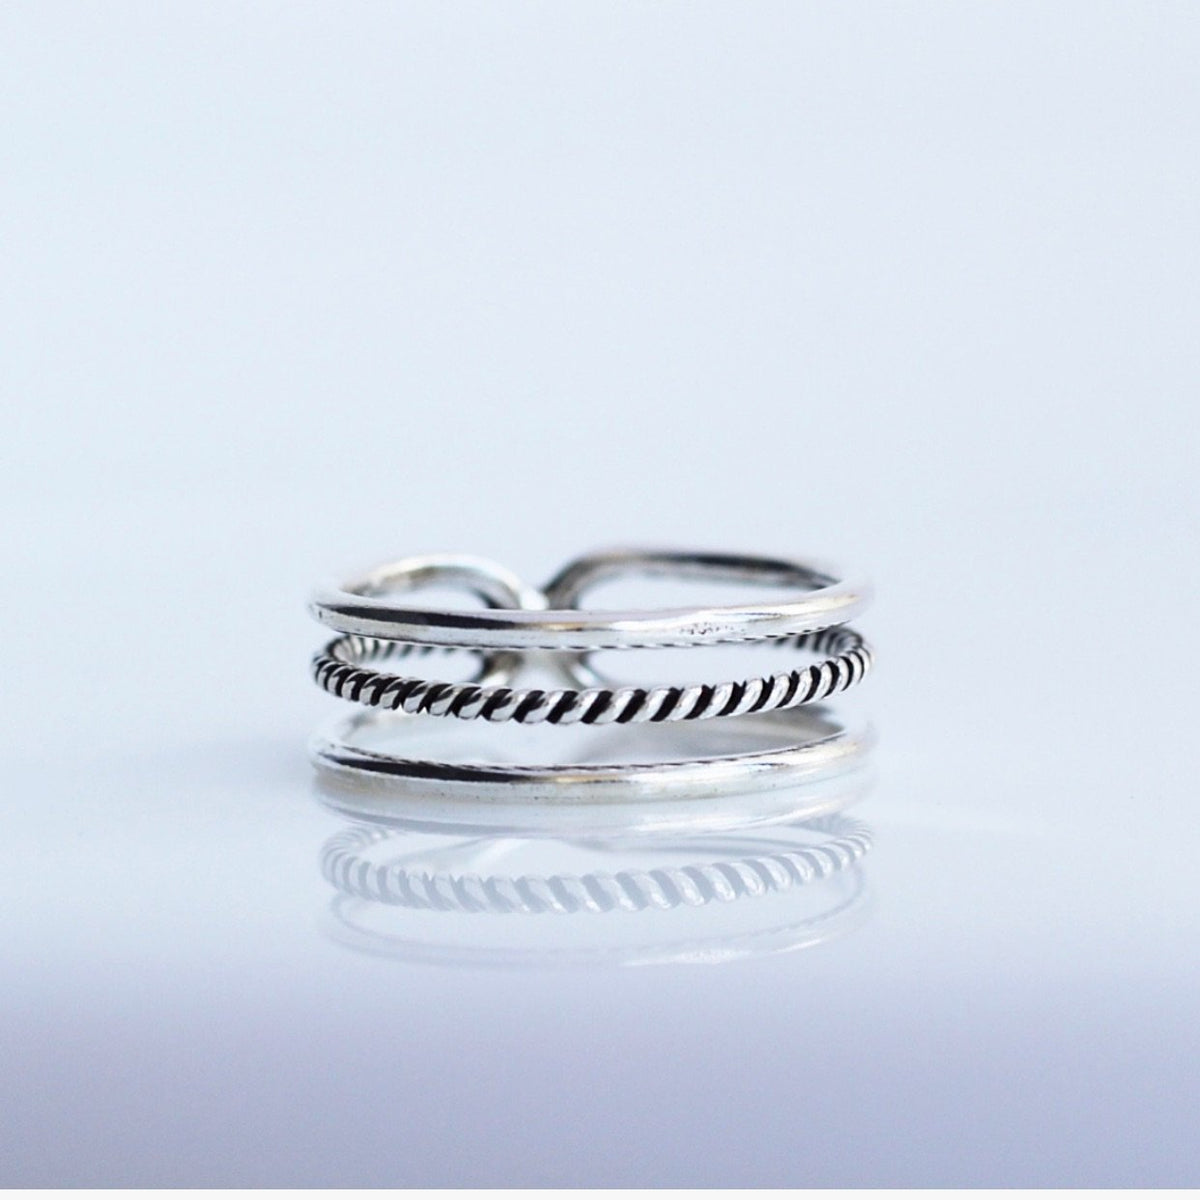 rings, silver rings, stack rings, sterling silver rings, dainty rings, anti tarnish rings, white gold rings, stacked rings, dainty rings, sterling silver rings, .925 rings, casual rings for everyday, popular plain rings, Effortless Twist Ring, stack ring, gifts for her, jewelry gifts, simple jewelry, sterling silver ring by KesleyBoutique.com, fashion jewelry, fine jewelry, nice rings, affordable jewelry